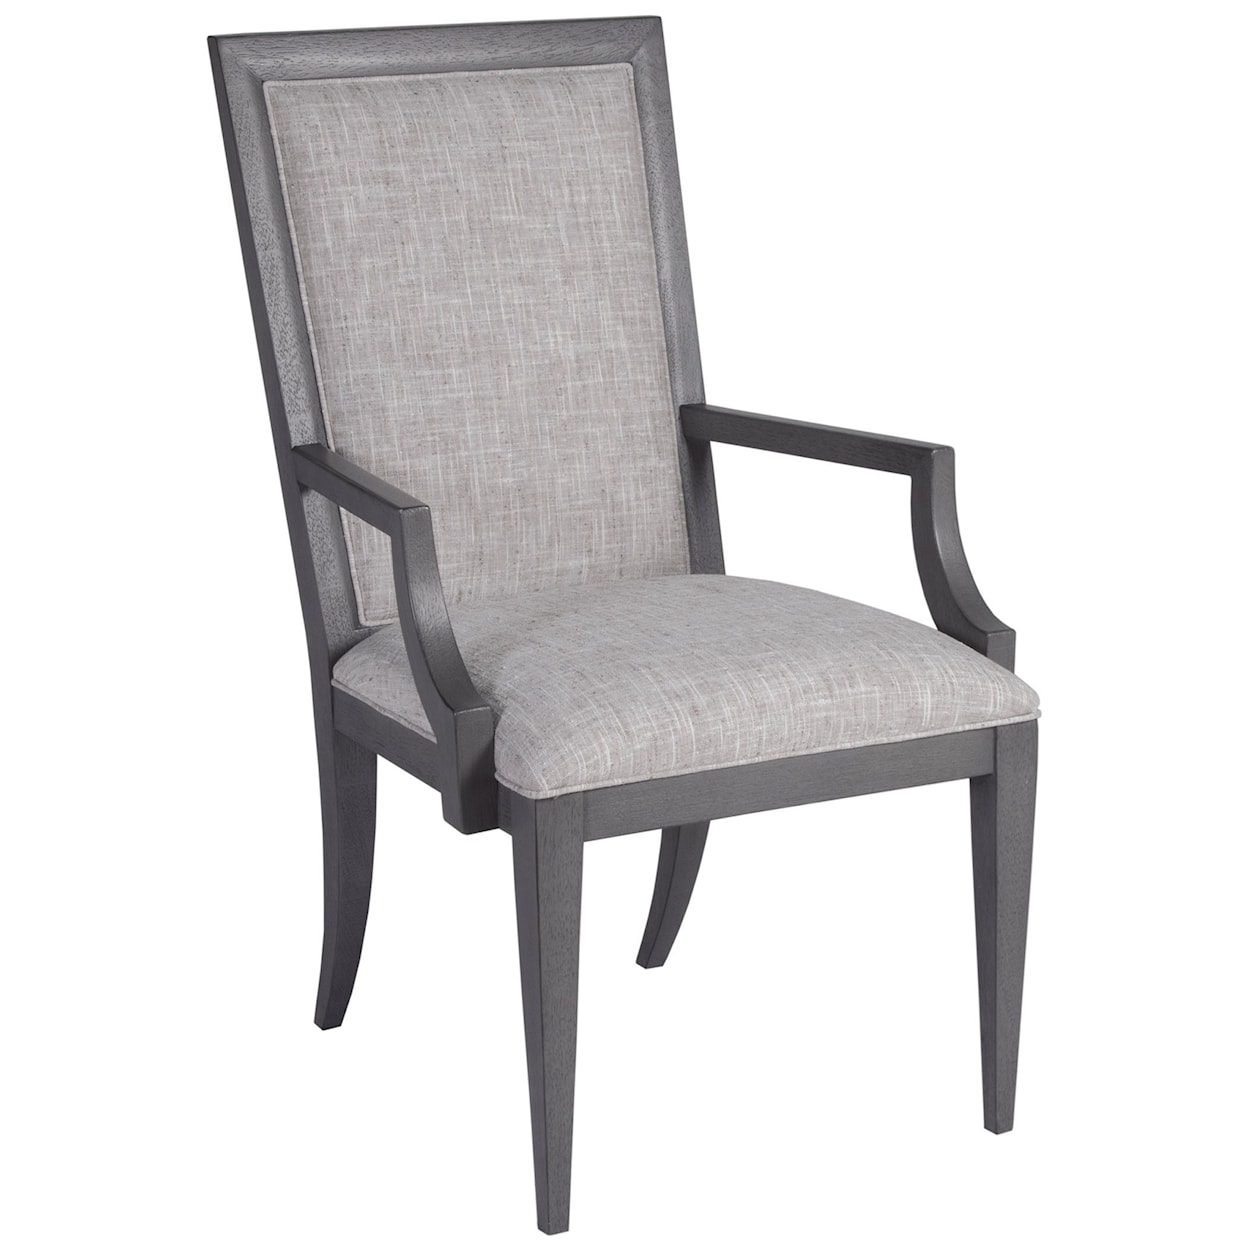 Artistica Appellation Upholstered Arm Chair